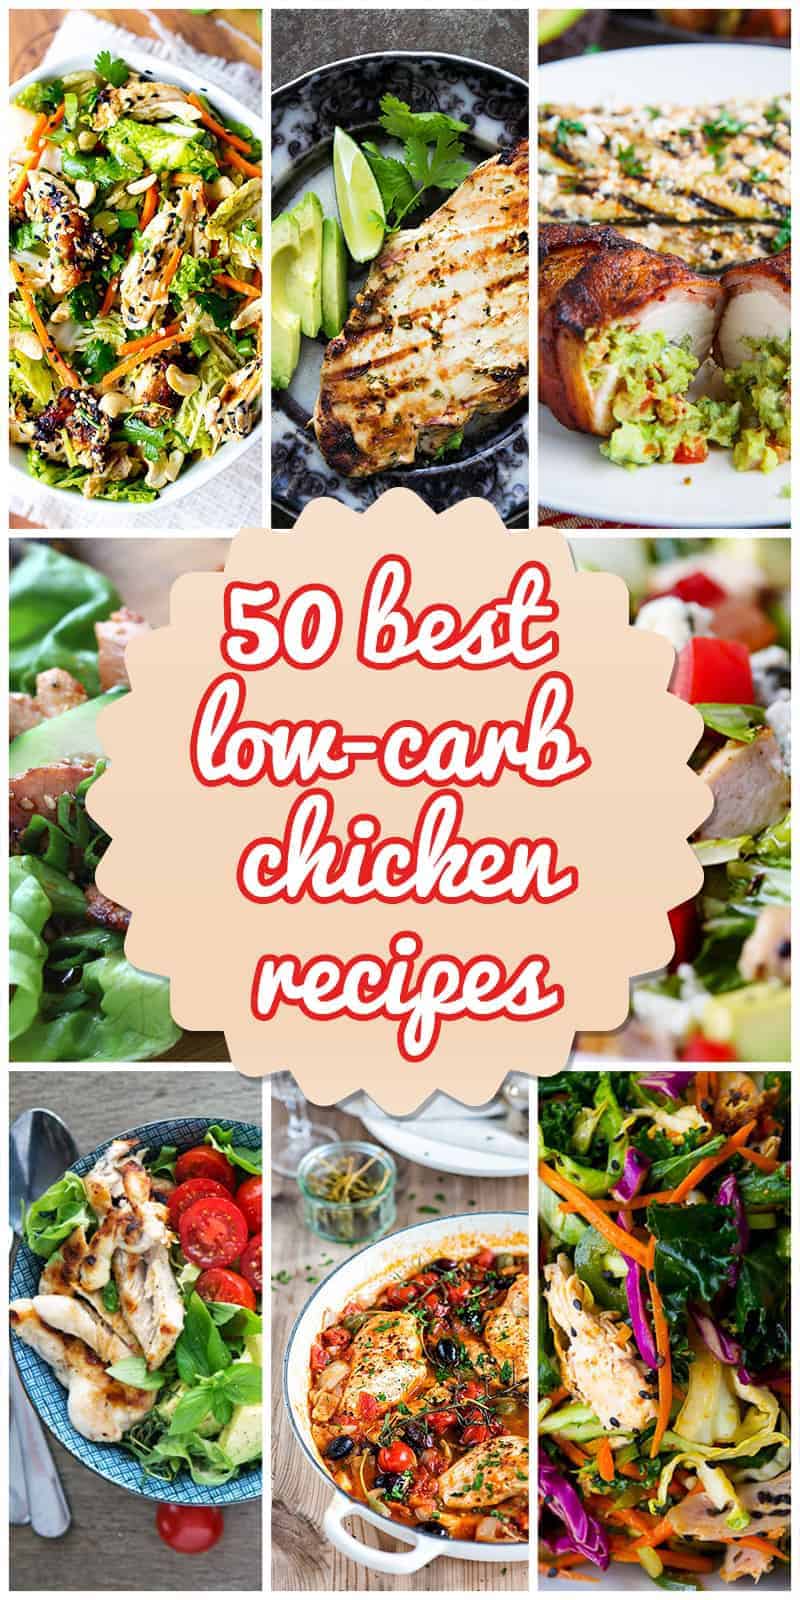 Best Low-Carb Chicken Recipes